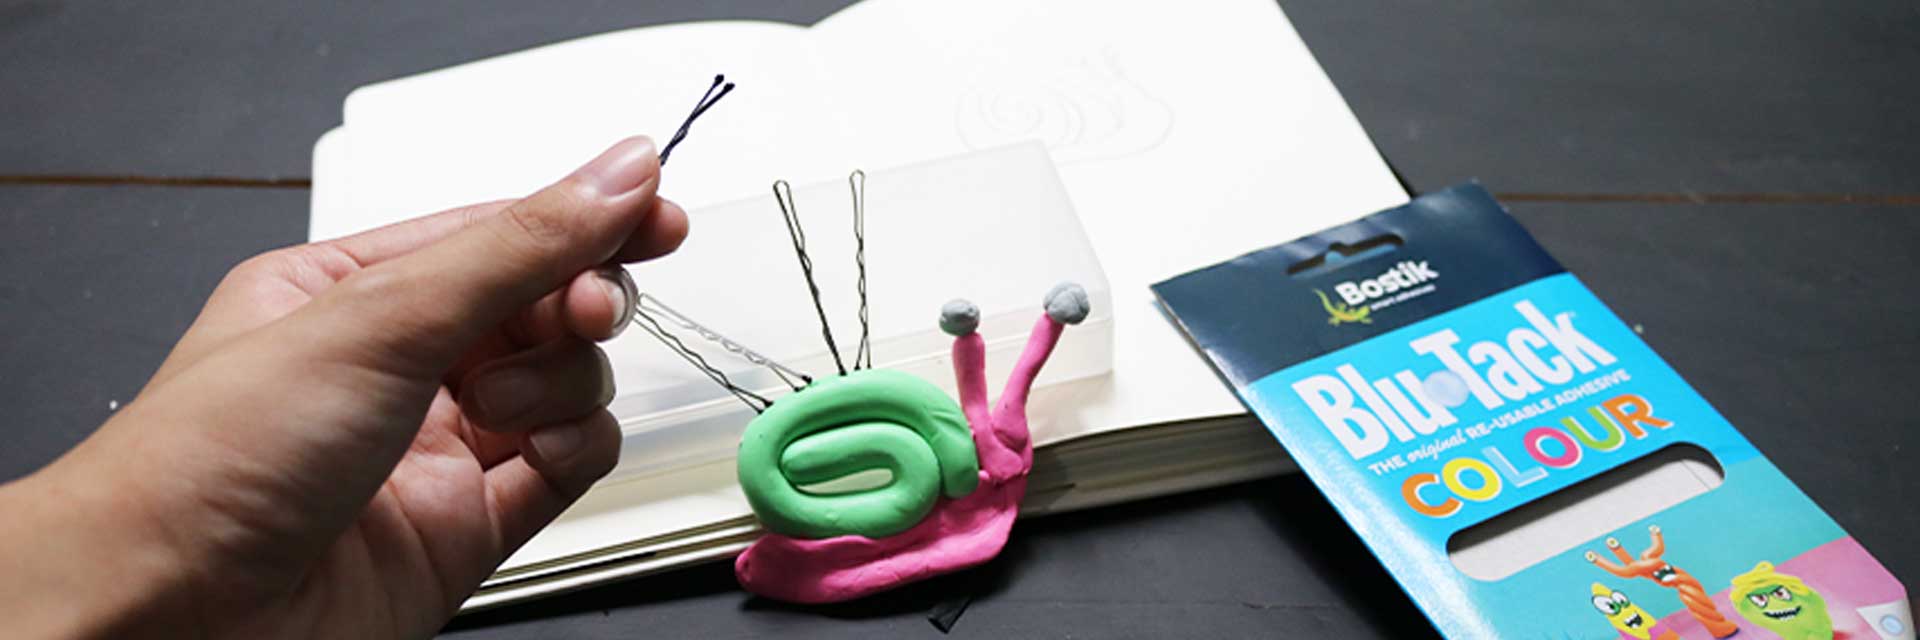 HOW TO CREATE MINI SCULPTURES WITH BLU-TACK